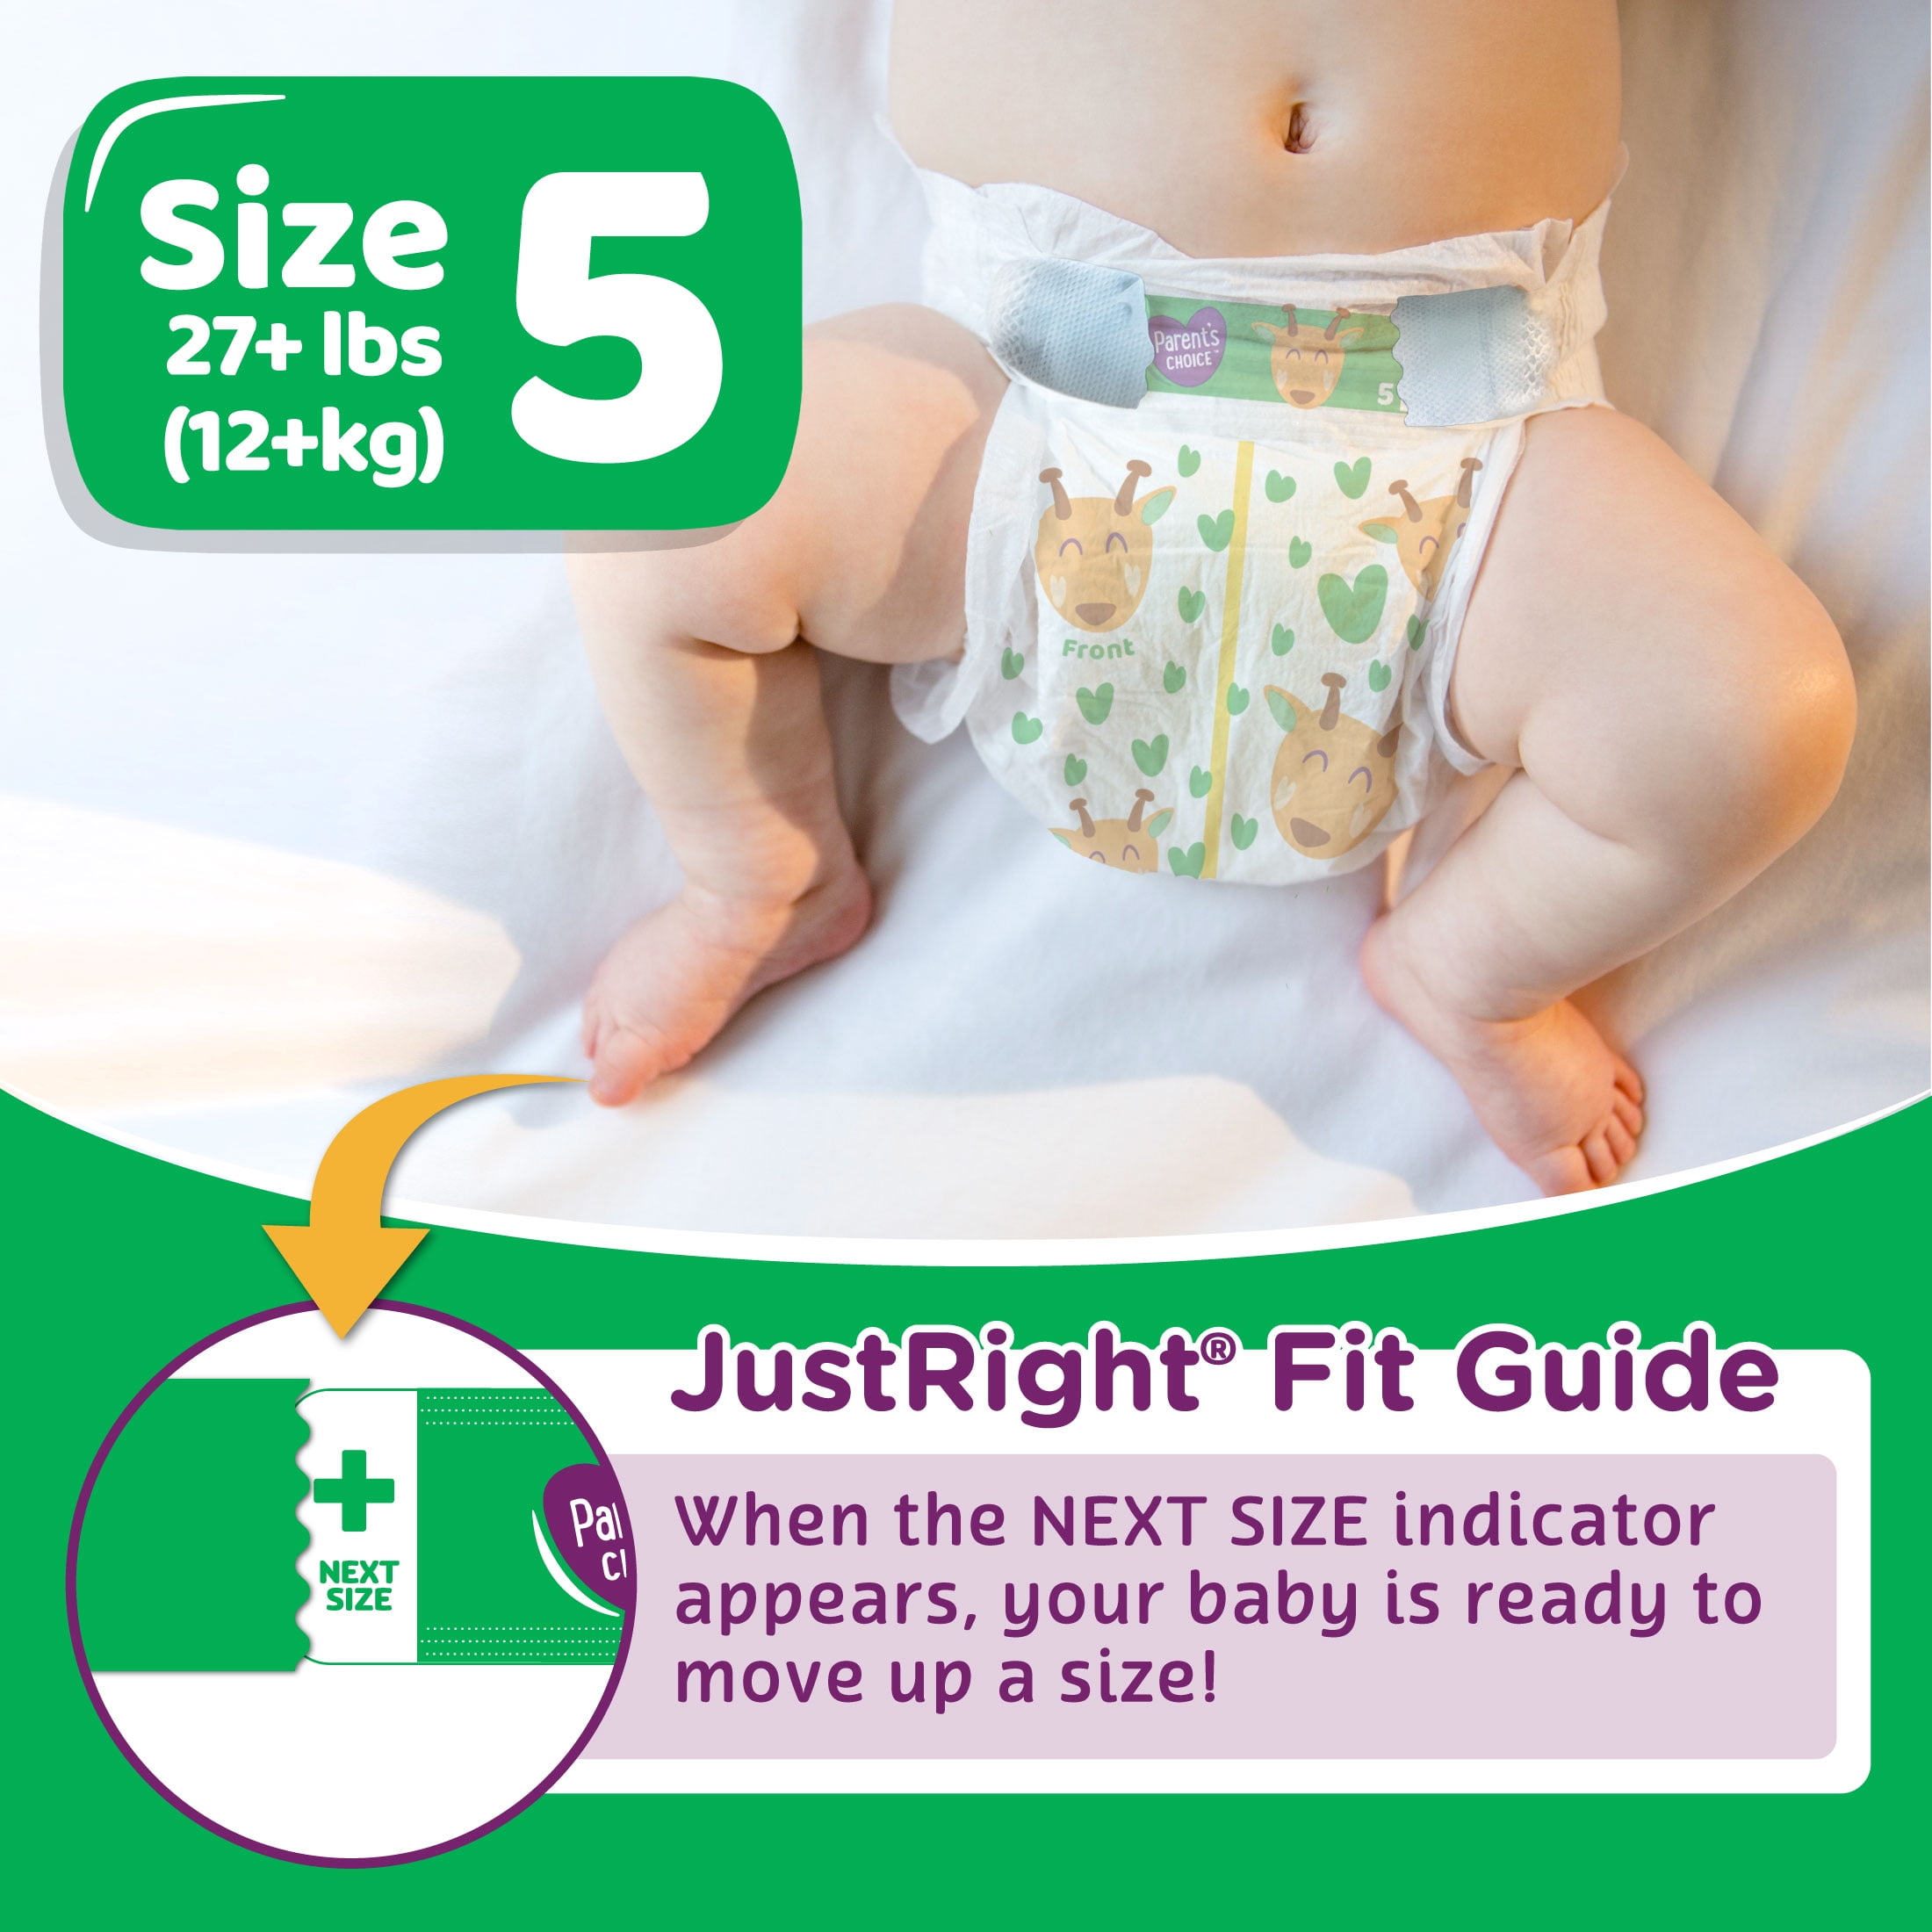 Parents Choice Diapers size 5 reviews in Diapers - Disposable Diapers -  ChickAdvisor (page 2)